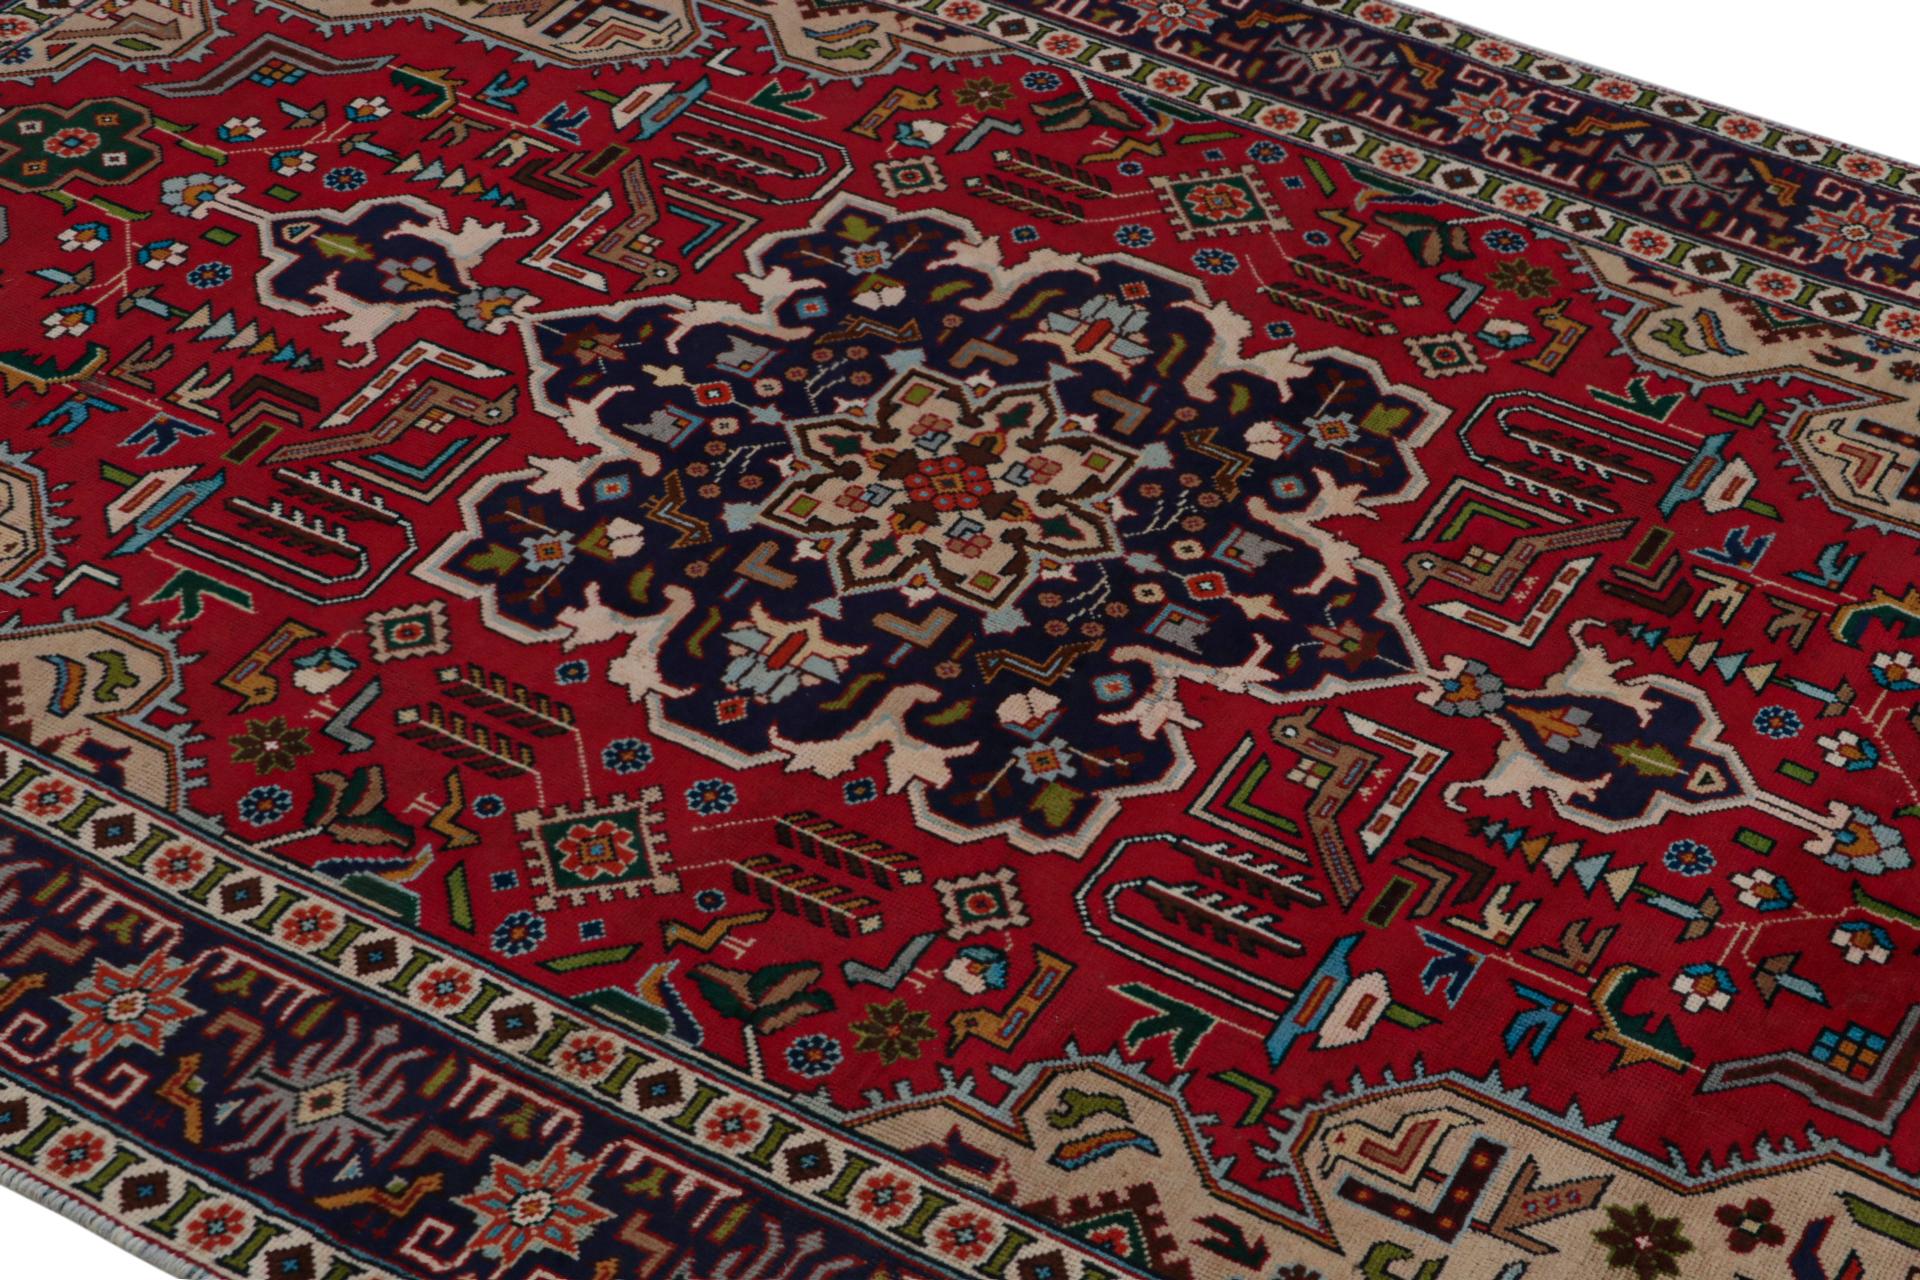 Vintage Persian Tabriz rug with Red-Blue Patterns by Rug & Kilim In Good Condition For Sale In Long Island City, NY